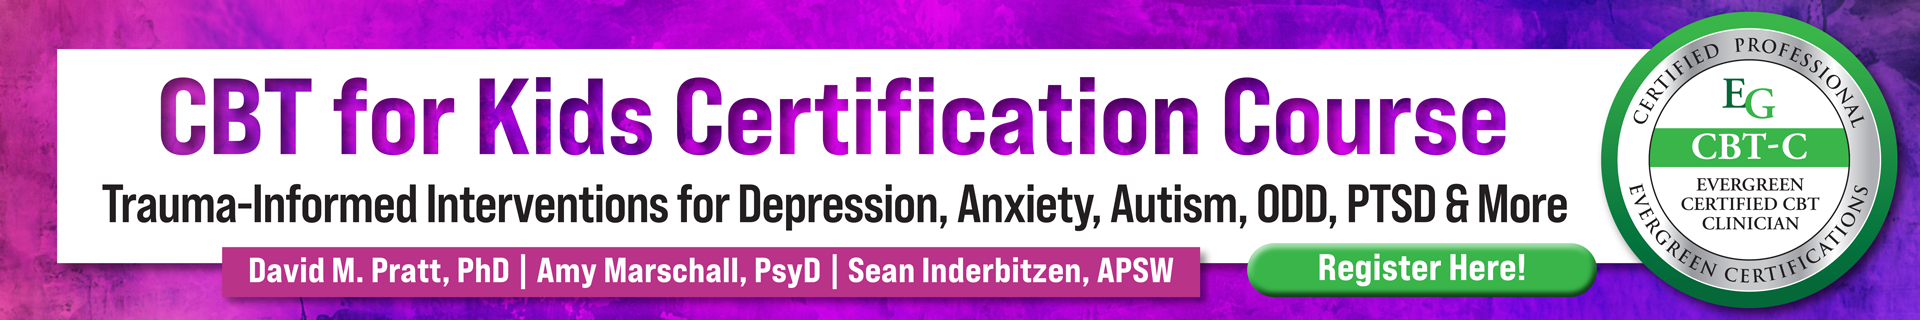 CBT for Kids Certification Course: Trauma-Informed Interventions for Depression, Anxiety, Autism, ODD, PTSD & More